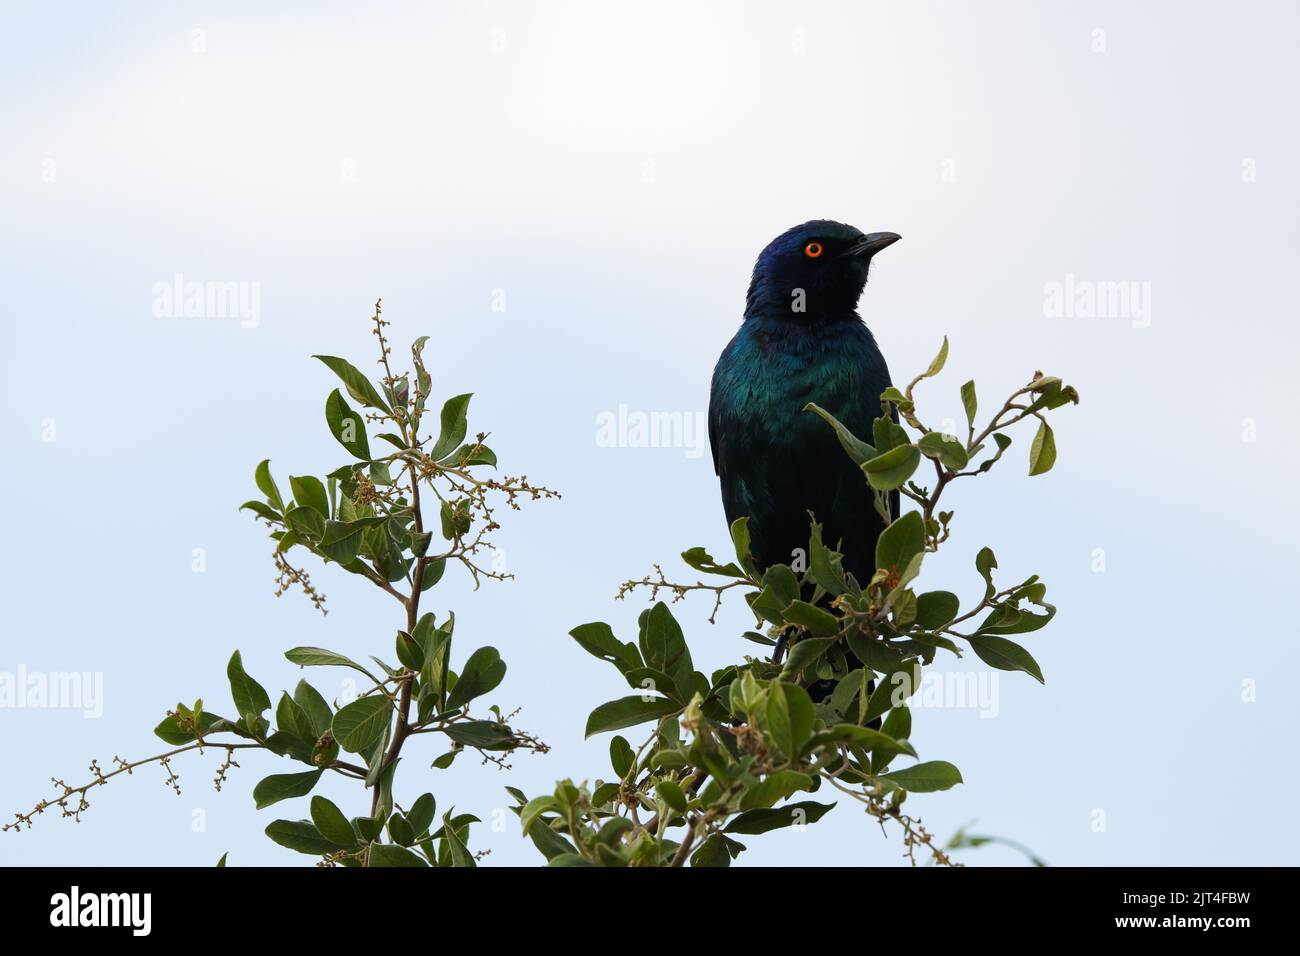 Greater Blue-Eared Starling Bird Perching On Branch (Lamprotornis chalybaeus) Stock Photo